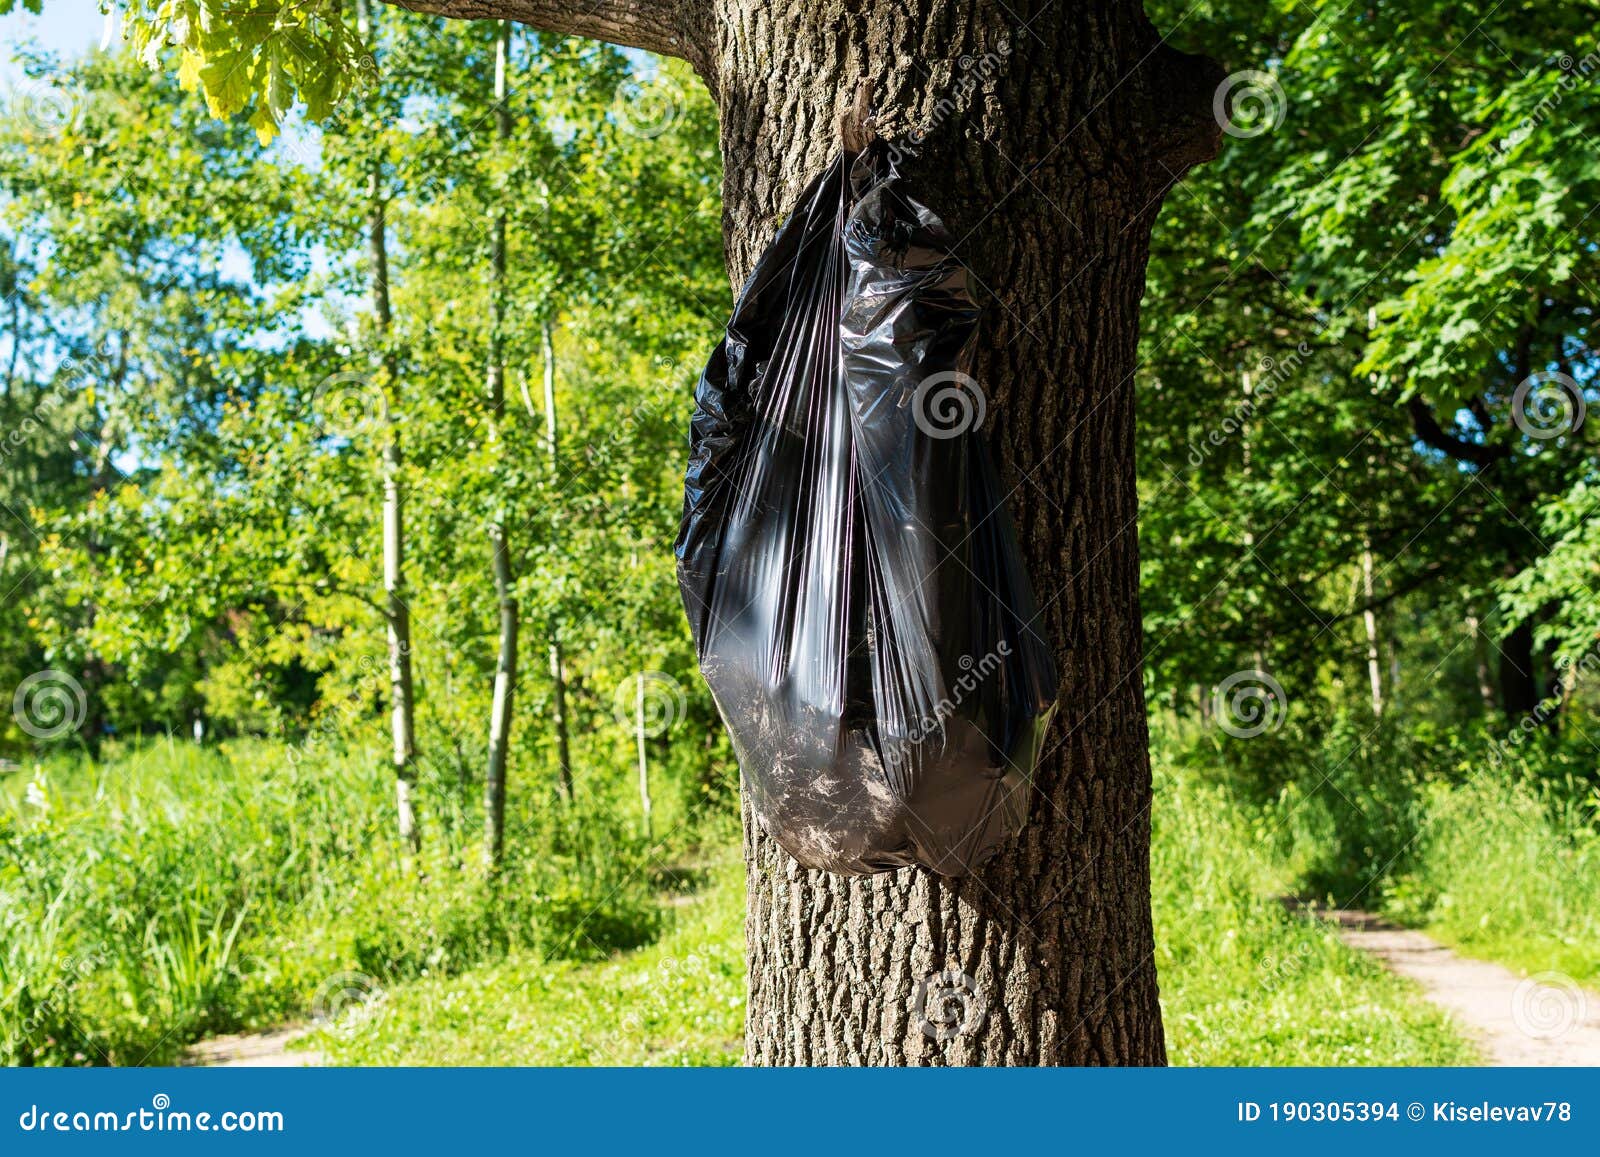 Black Plastic Trash Bag Hanging on a Tree. Caring for the